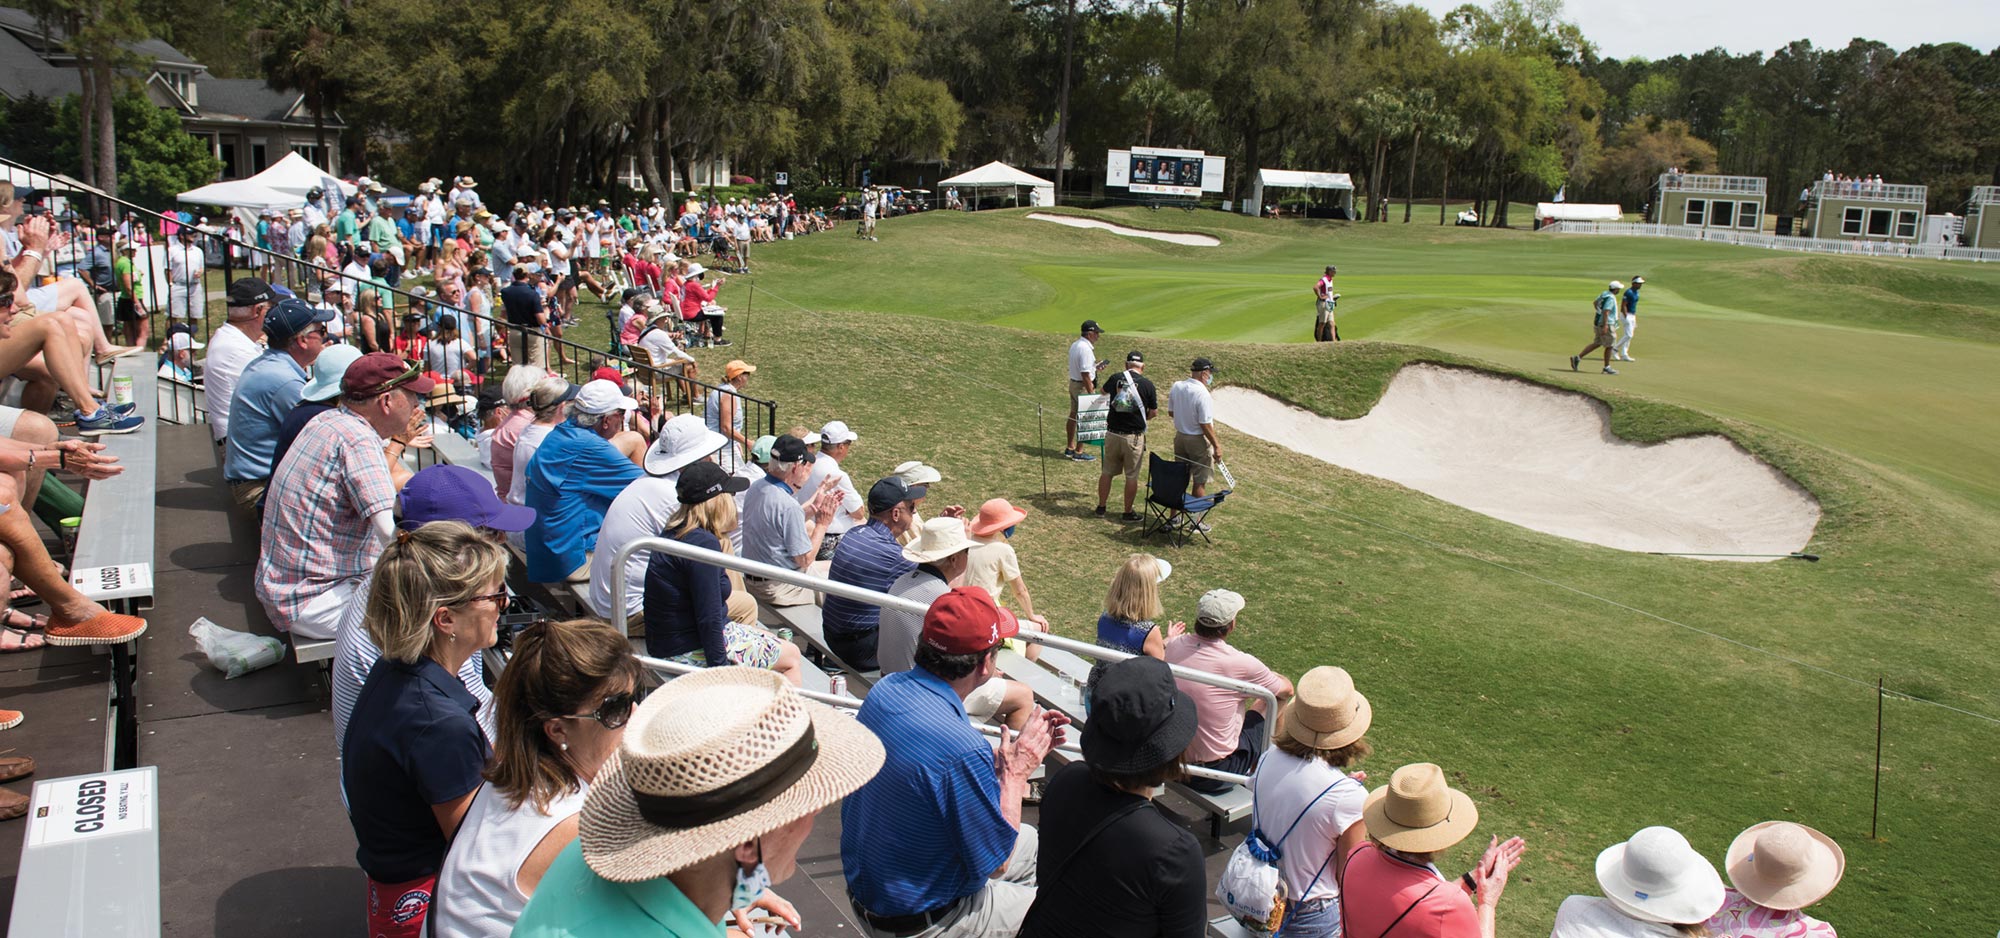 Golf fans fill the gallery as golfers play in a tournament on one of the six championship golf courses.